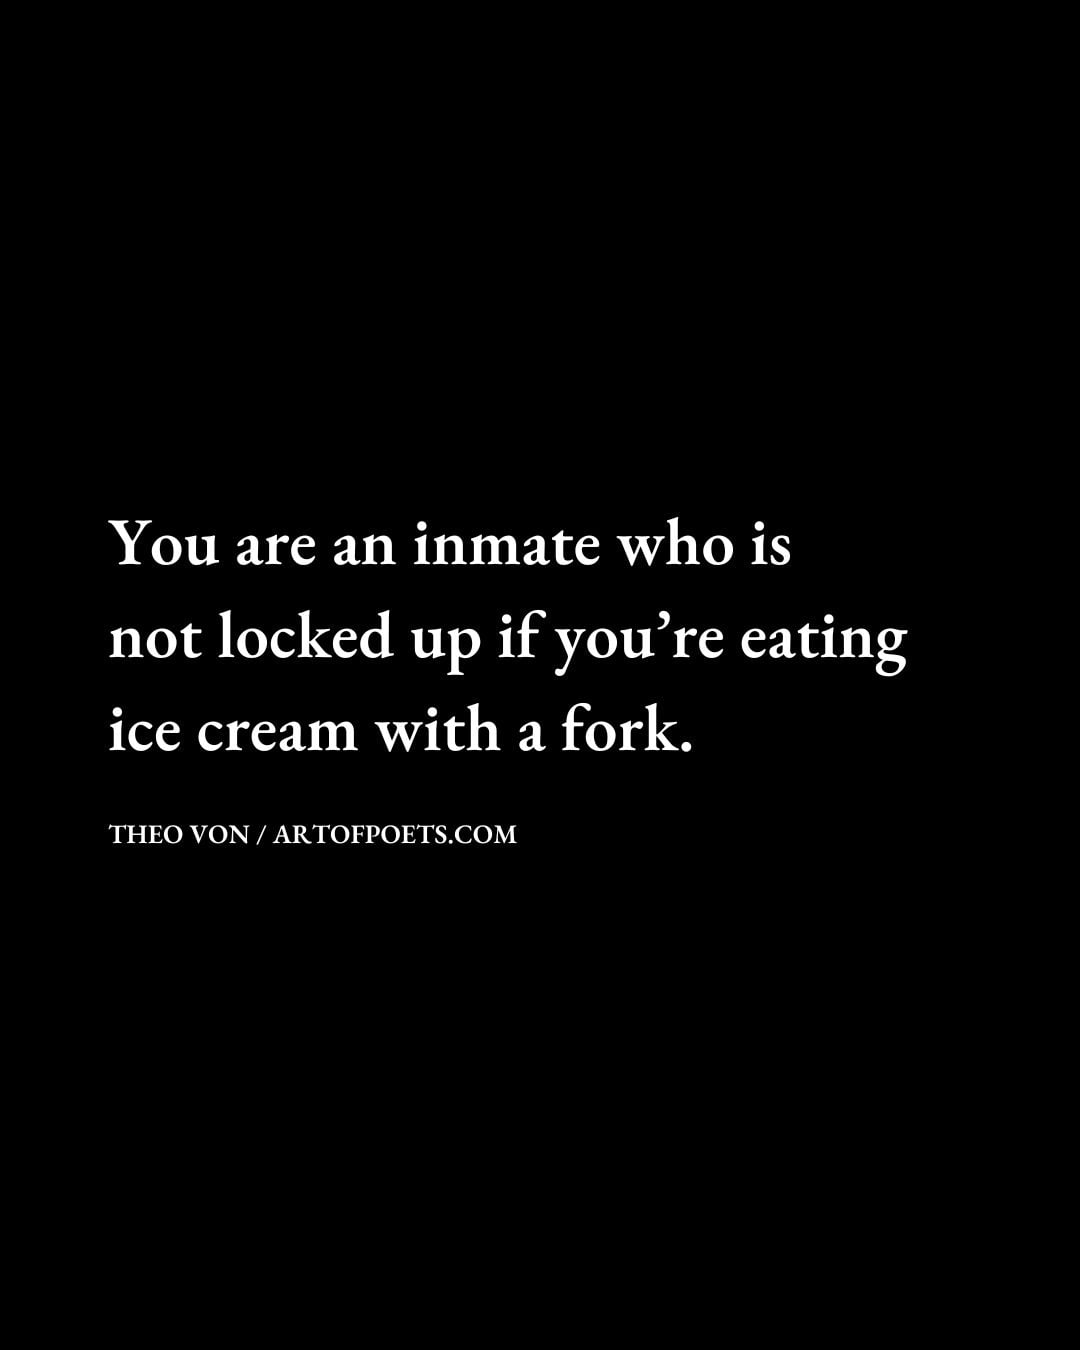 You are an inmate who is not locked up if youre eating ice cream with a fork